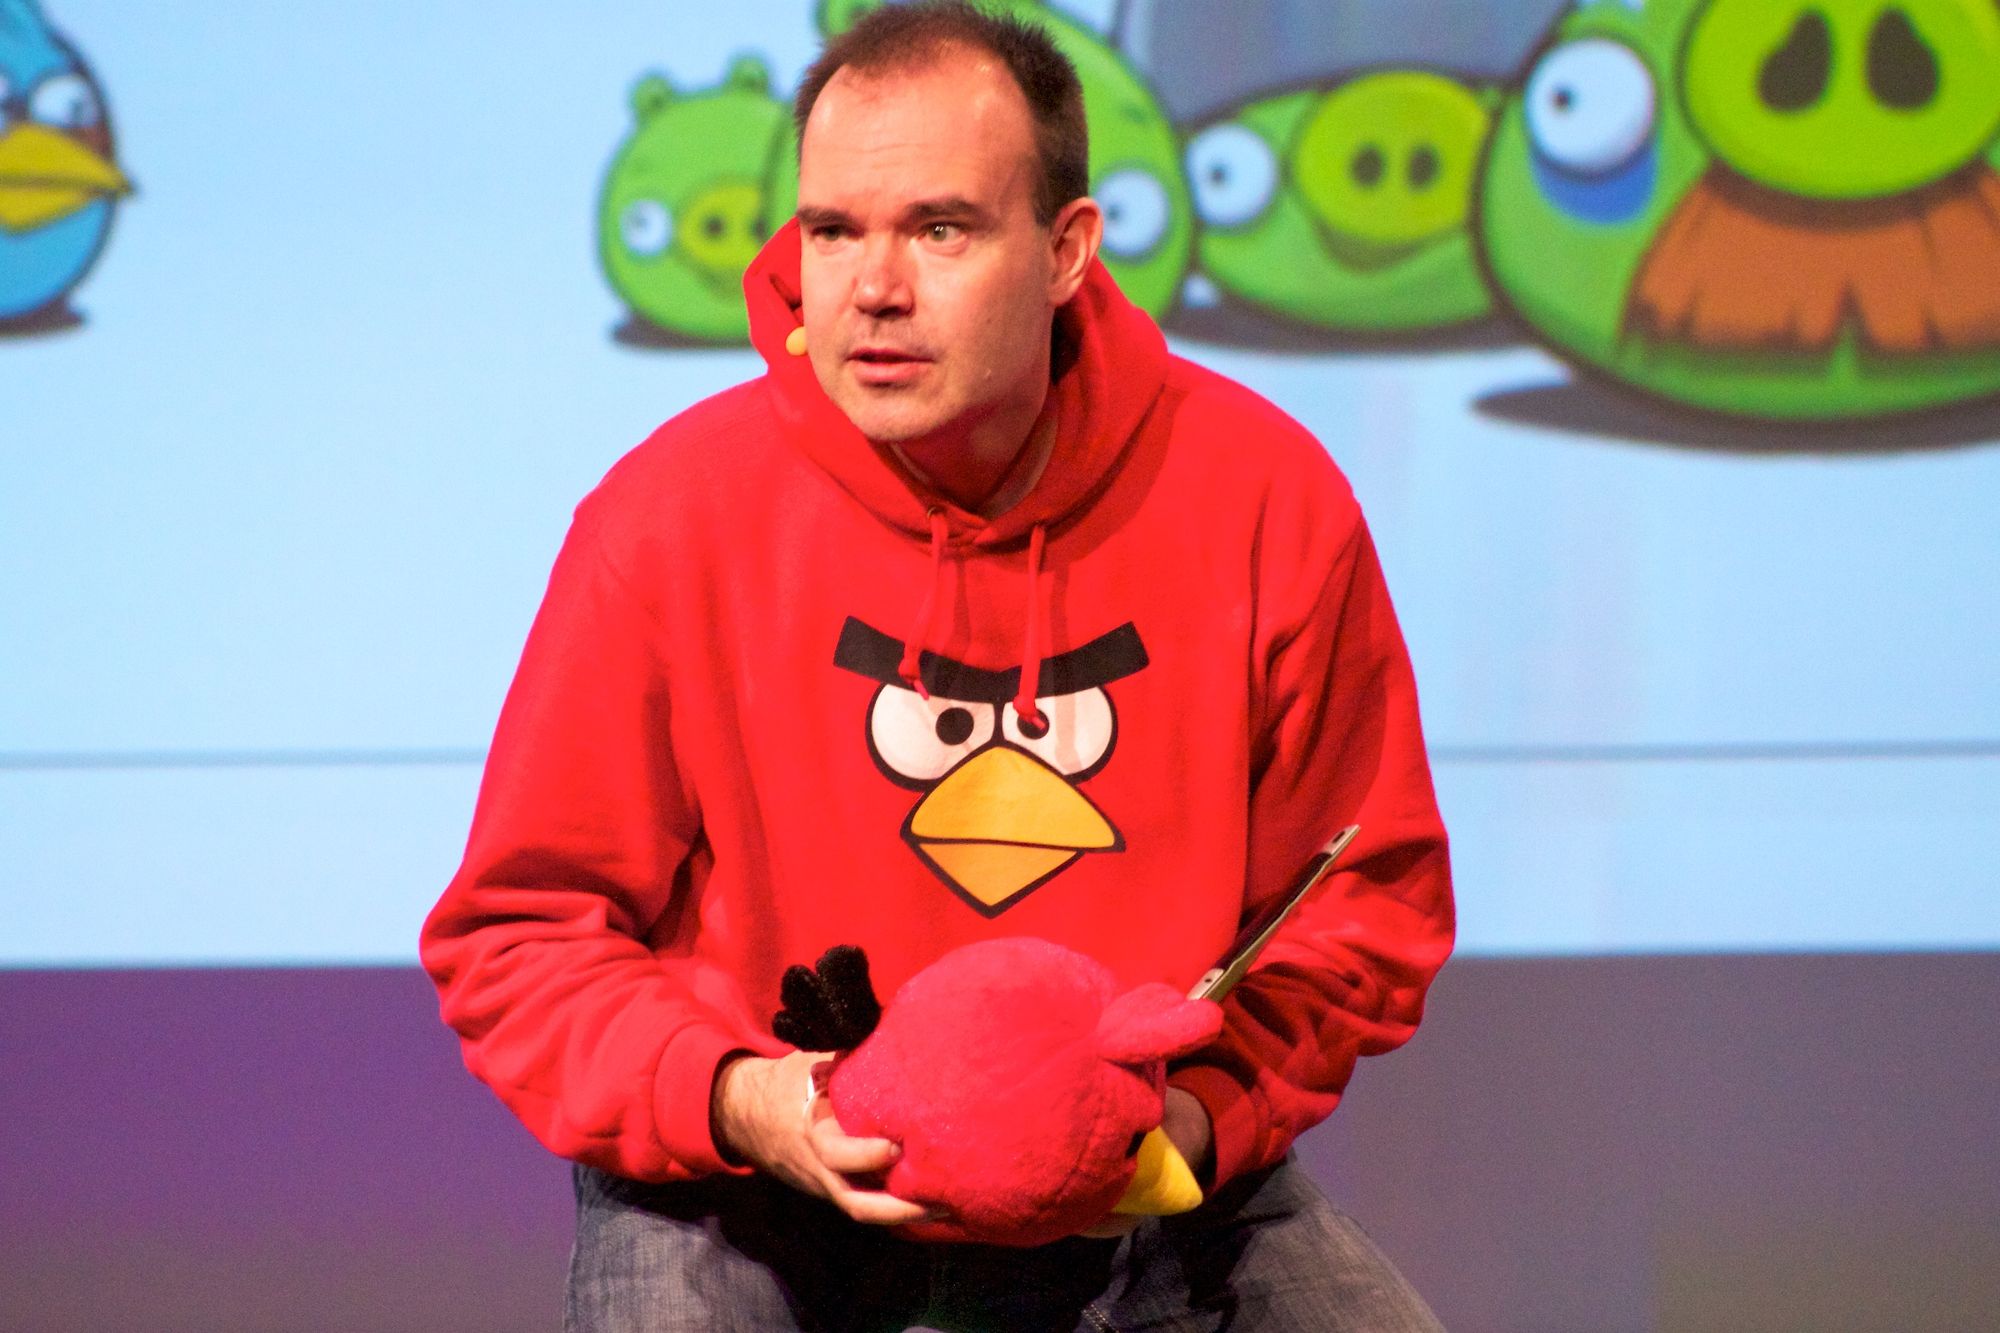 #next11 - that's one Angry Bird right there